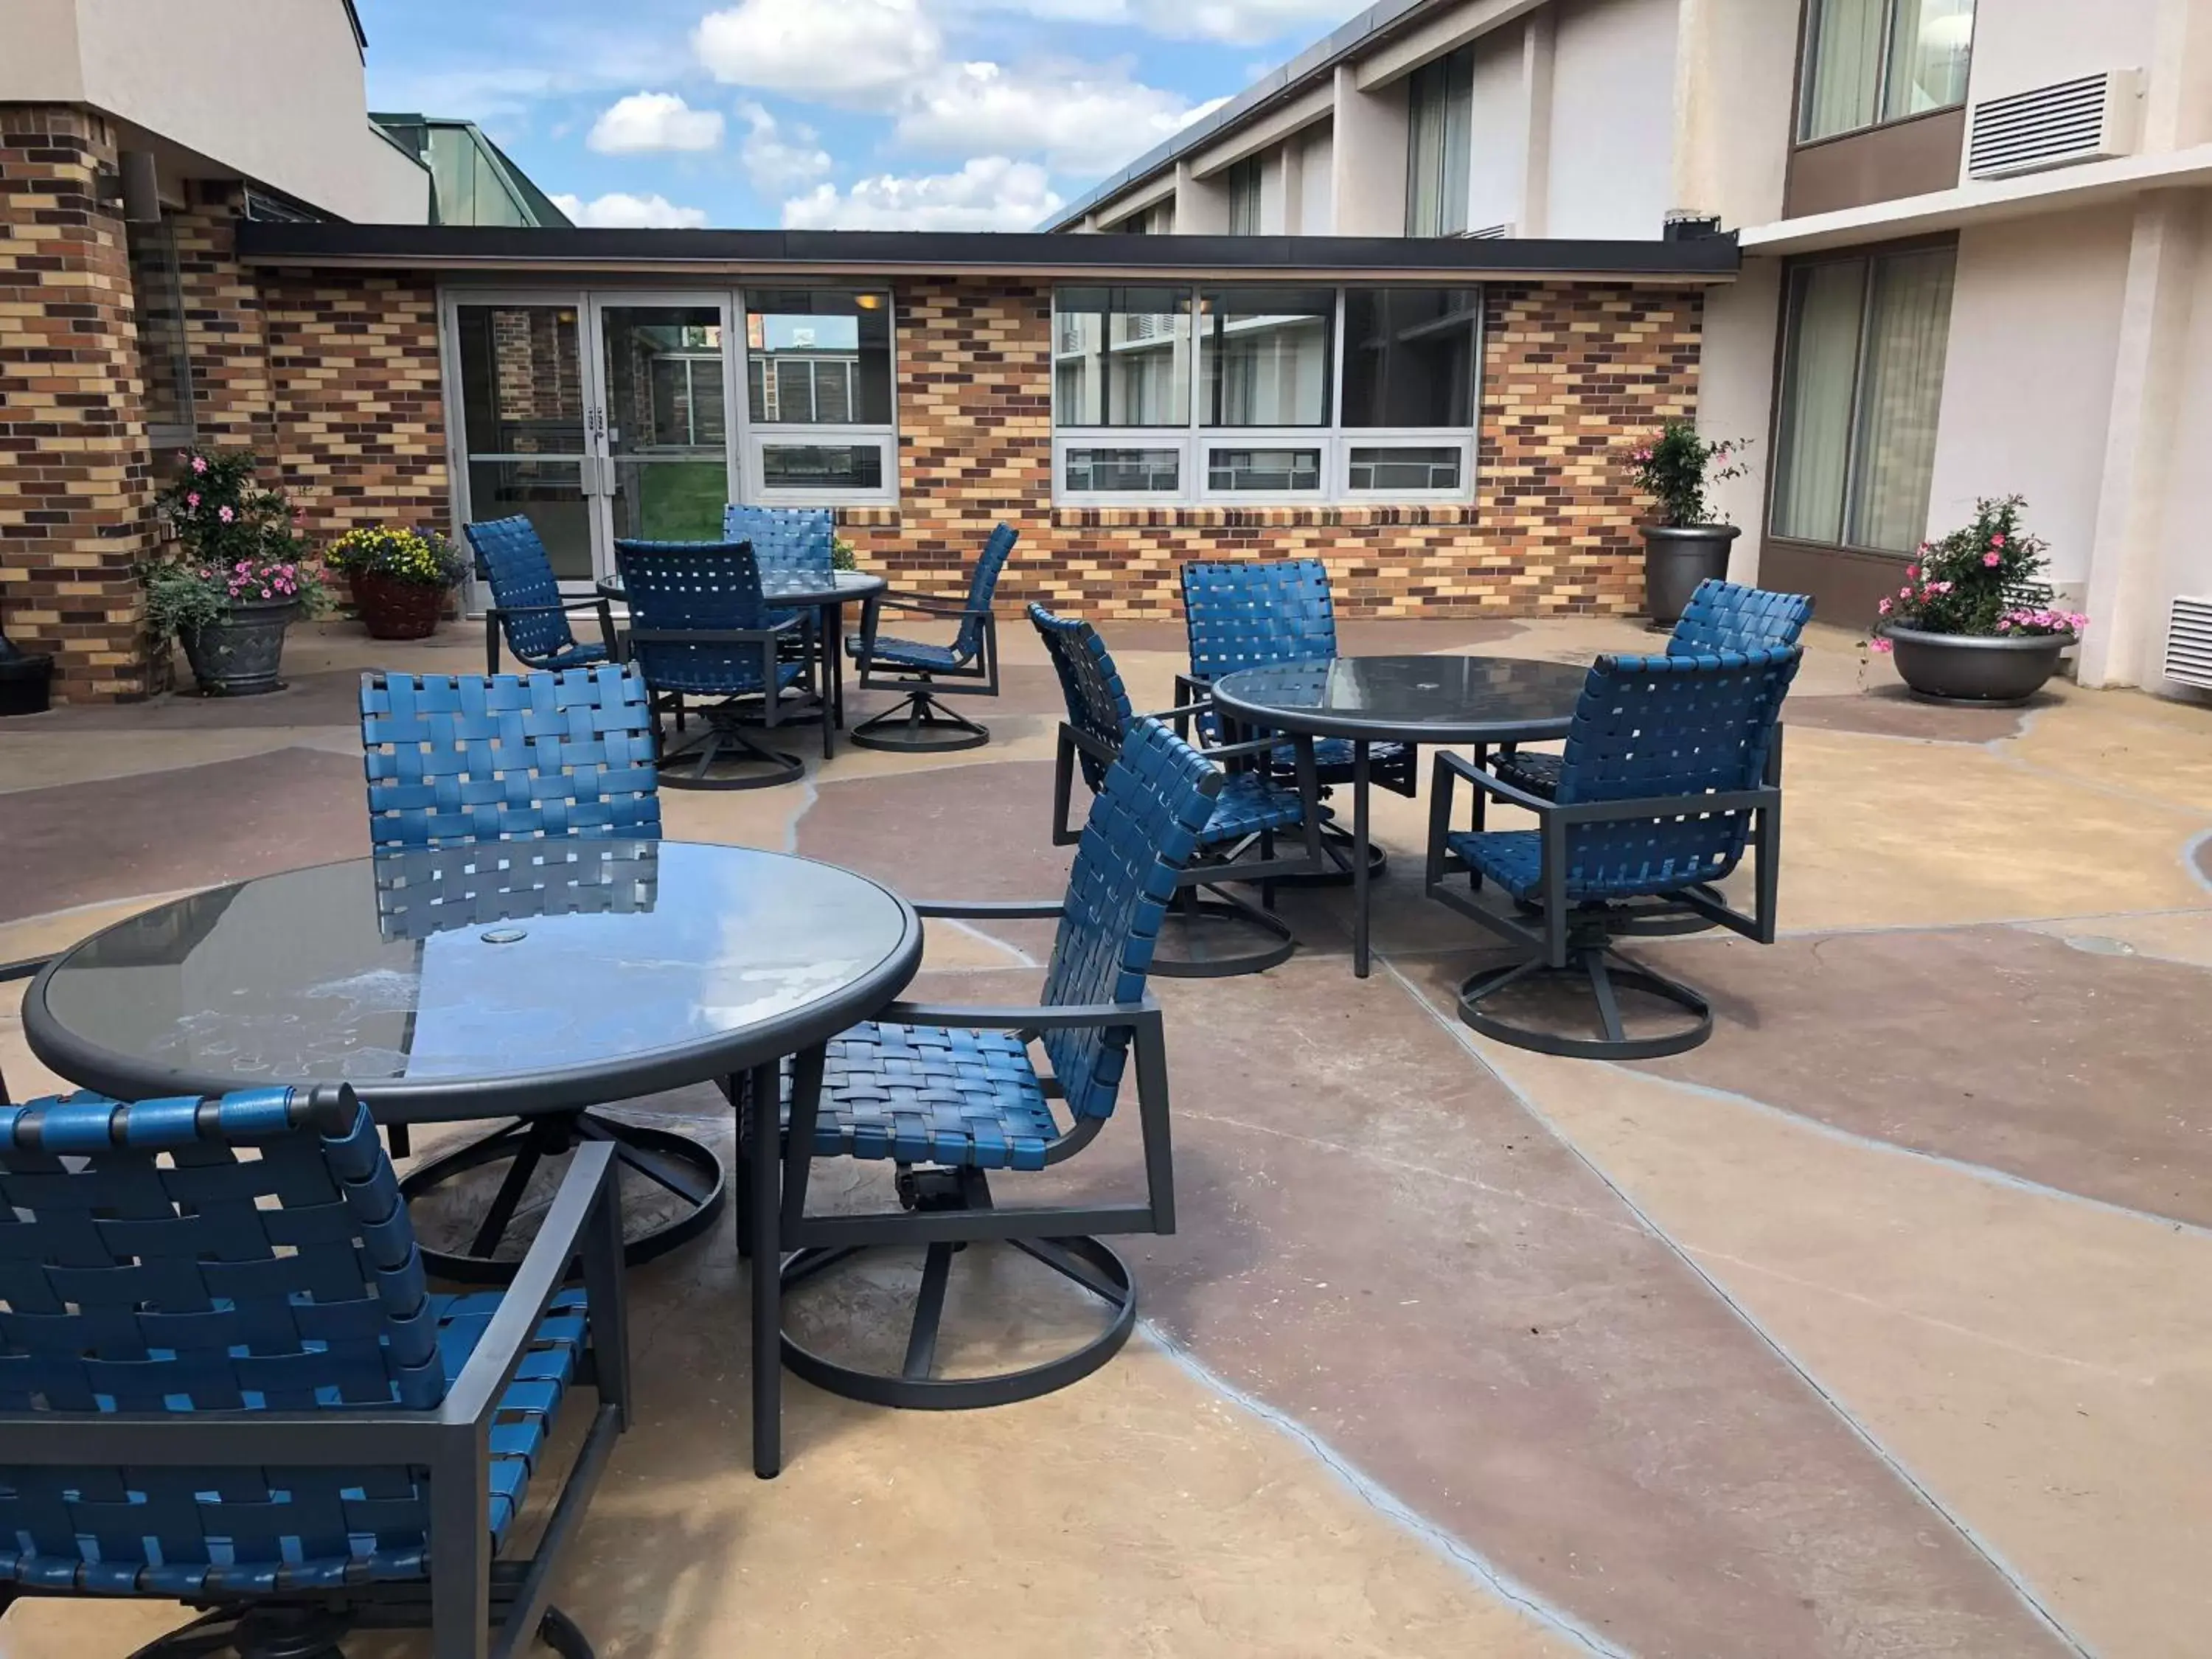 Property building in Best Western Tomah Hotel